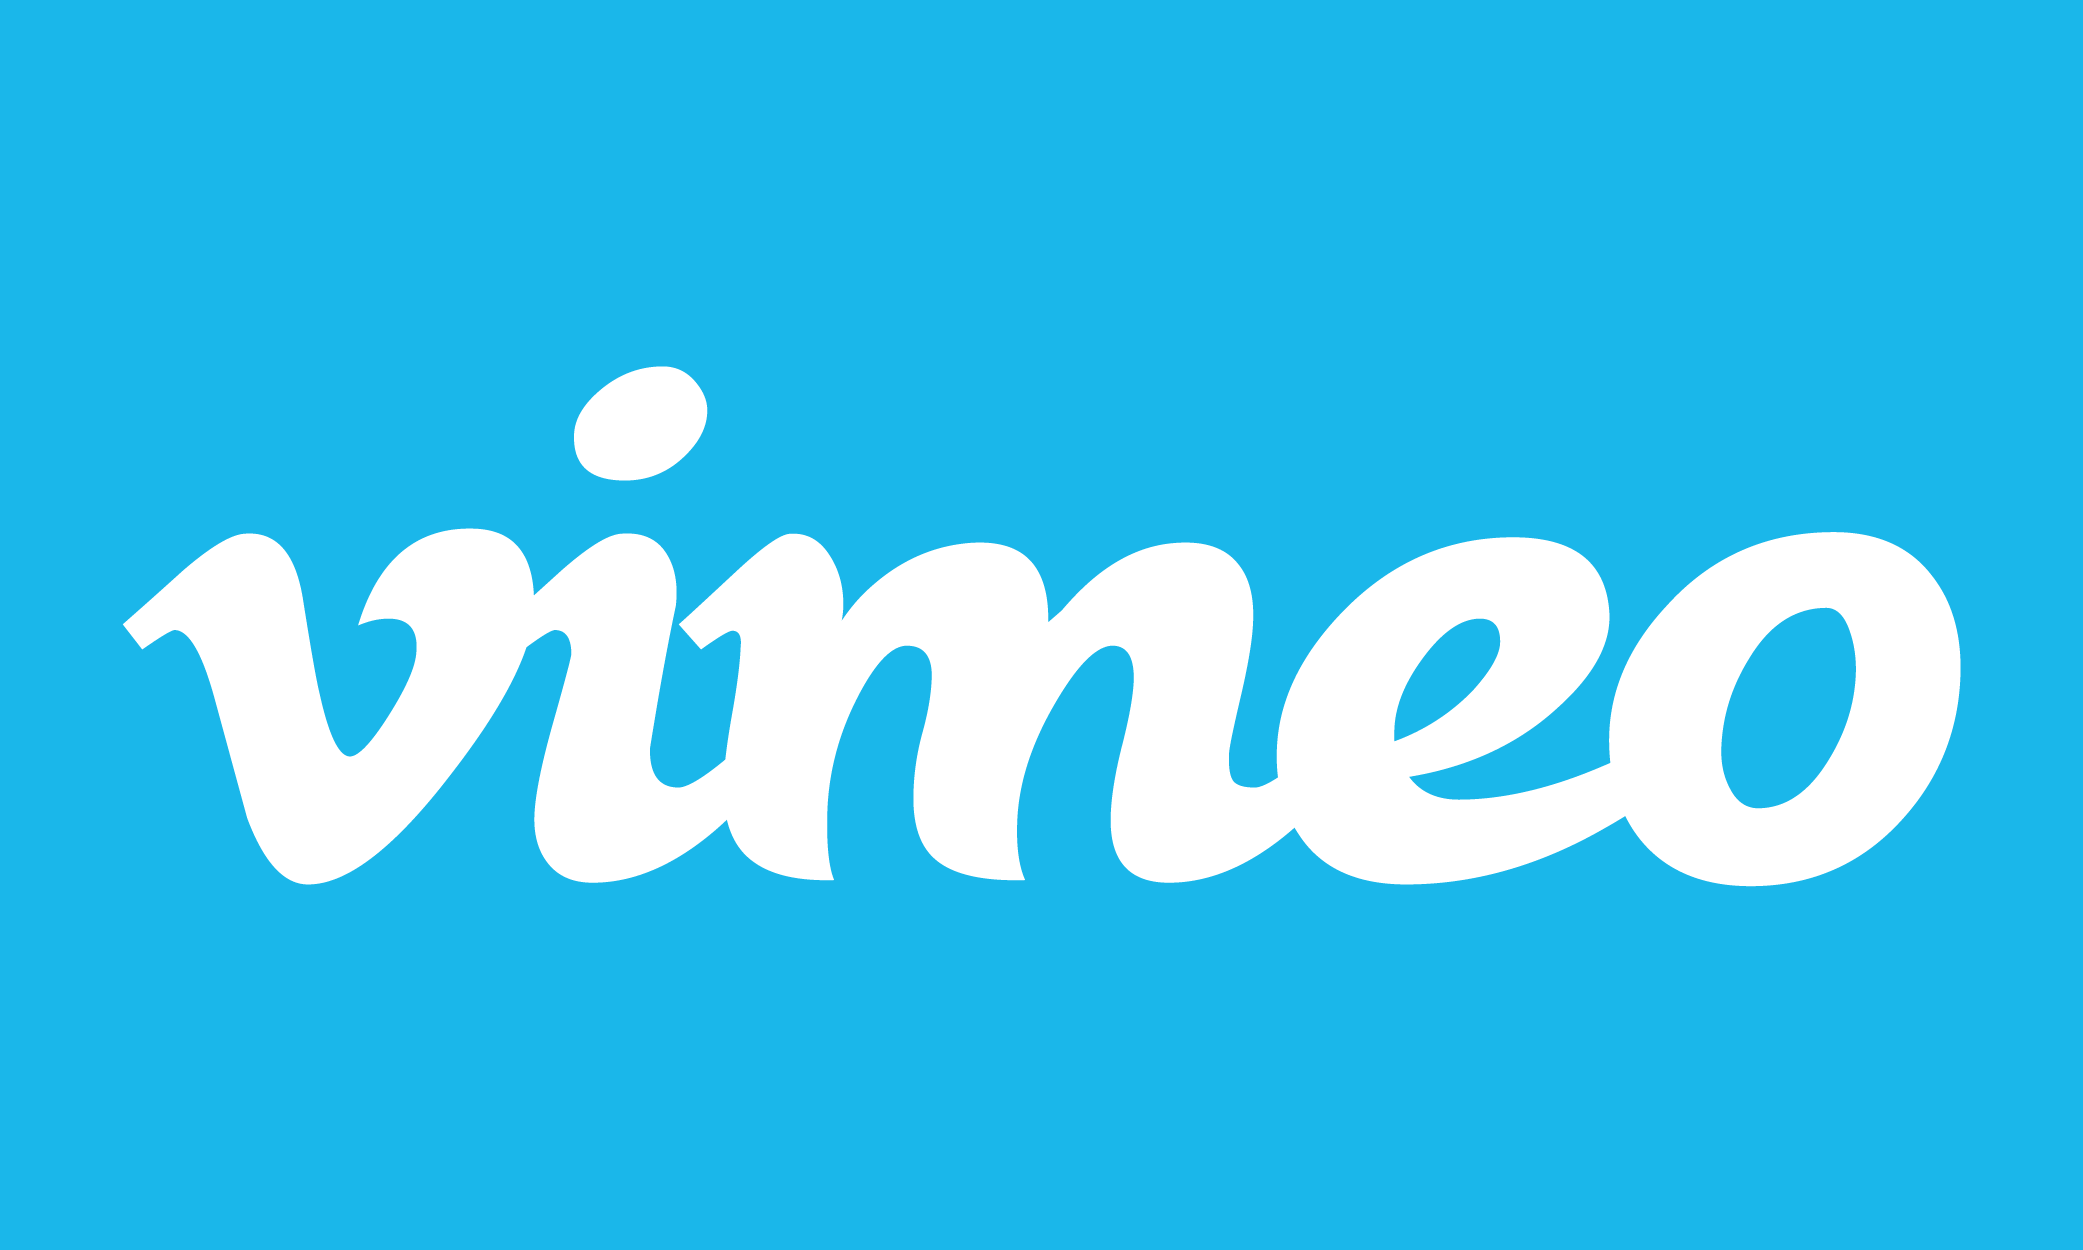 Vimeo is Launching a New Subscription Video Service